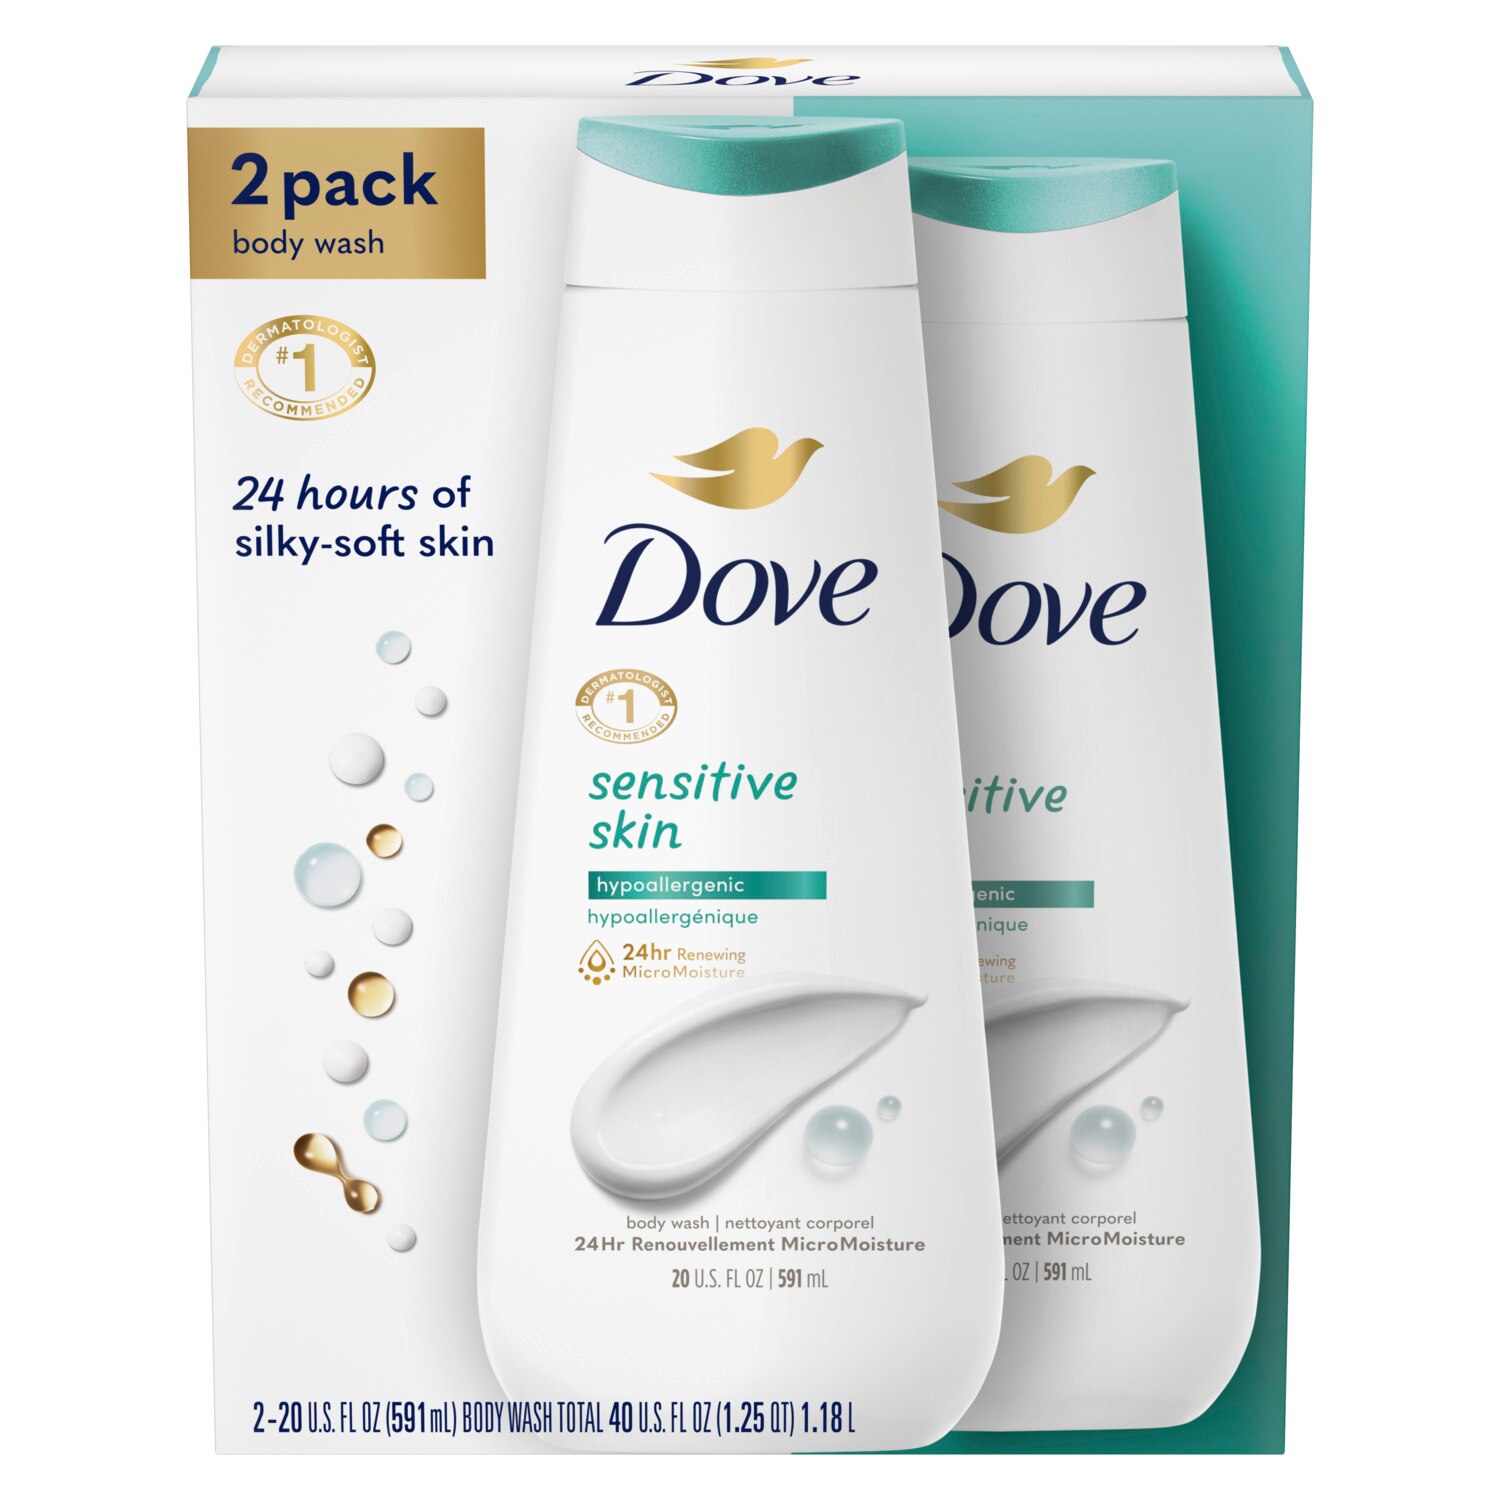 Dove Effectively Washes Away Bacteria While Nourishing Your Skin Sensitive Skin Body Wash for Softer and Smoother Skin, 22 OZ